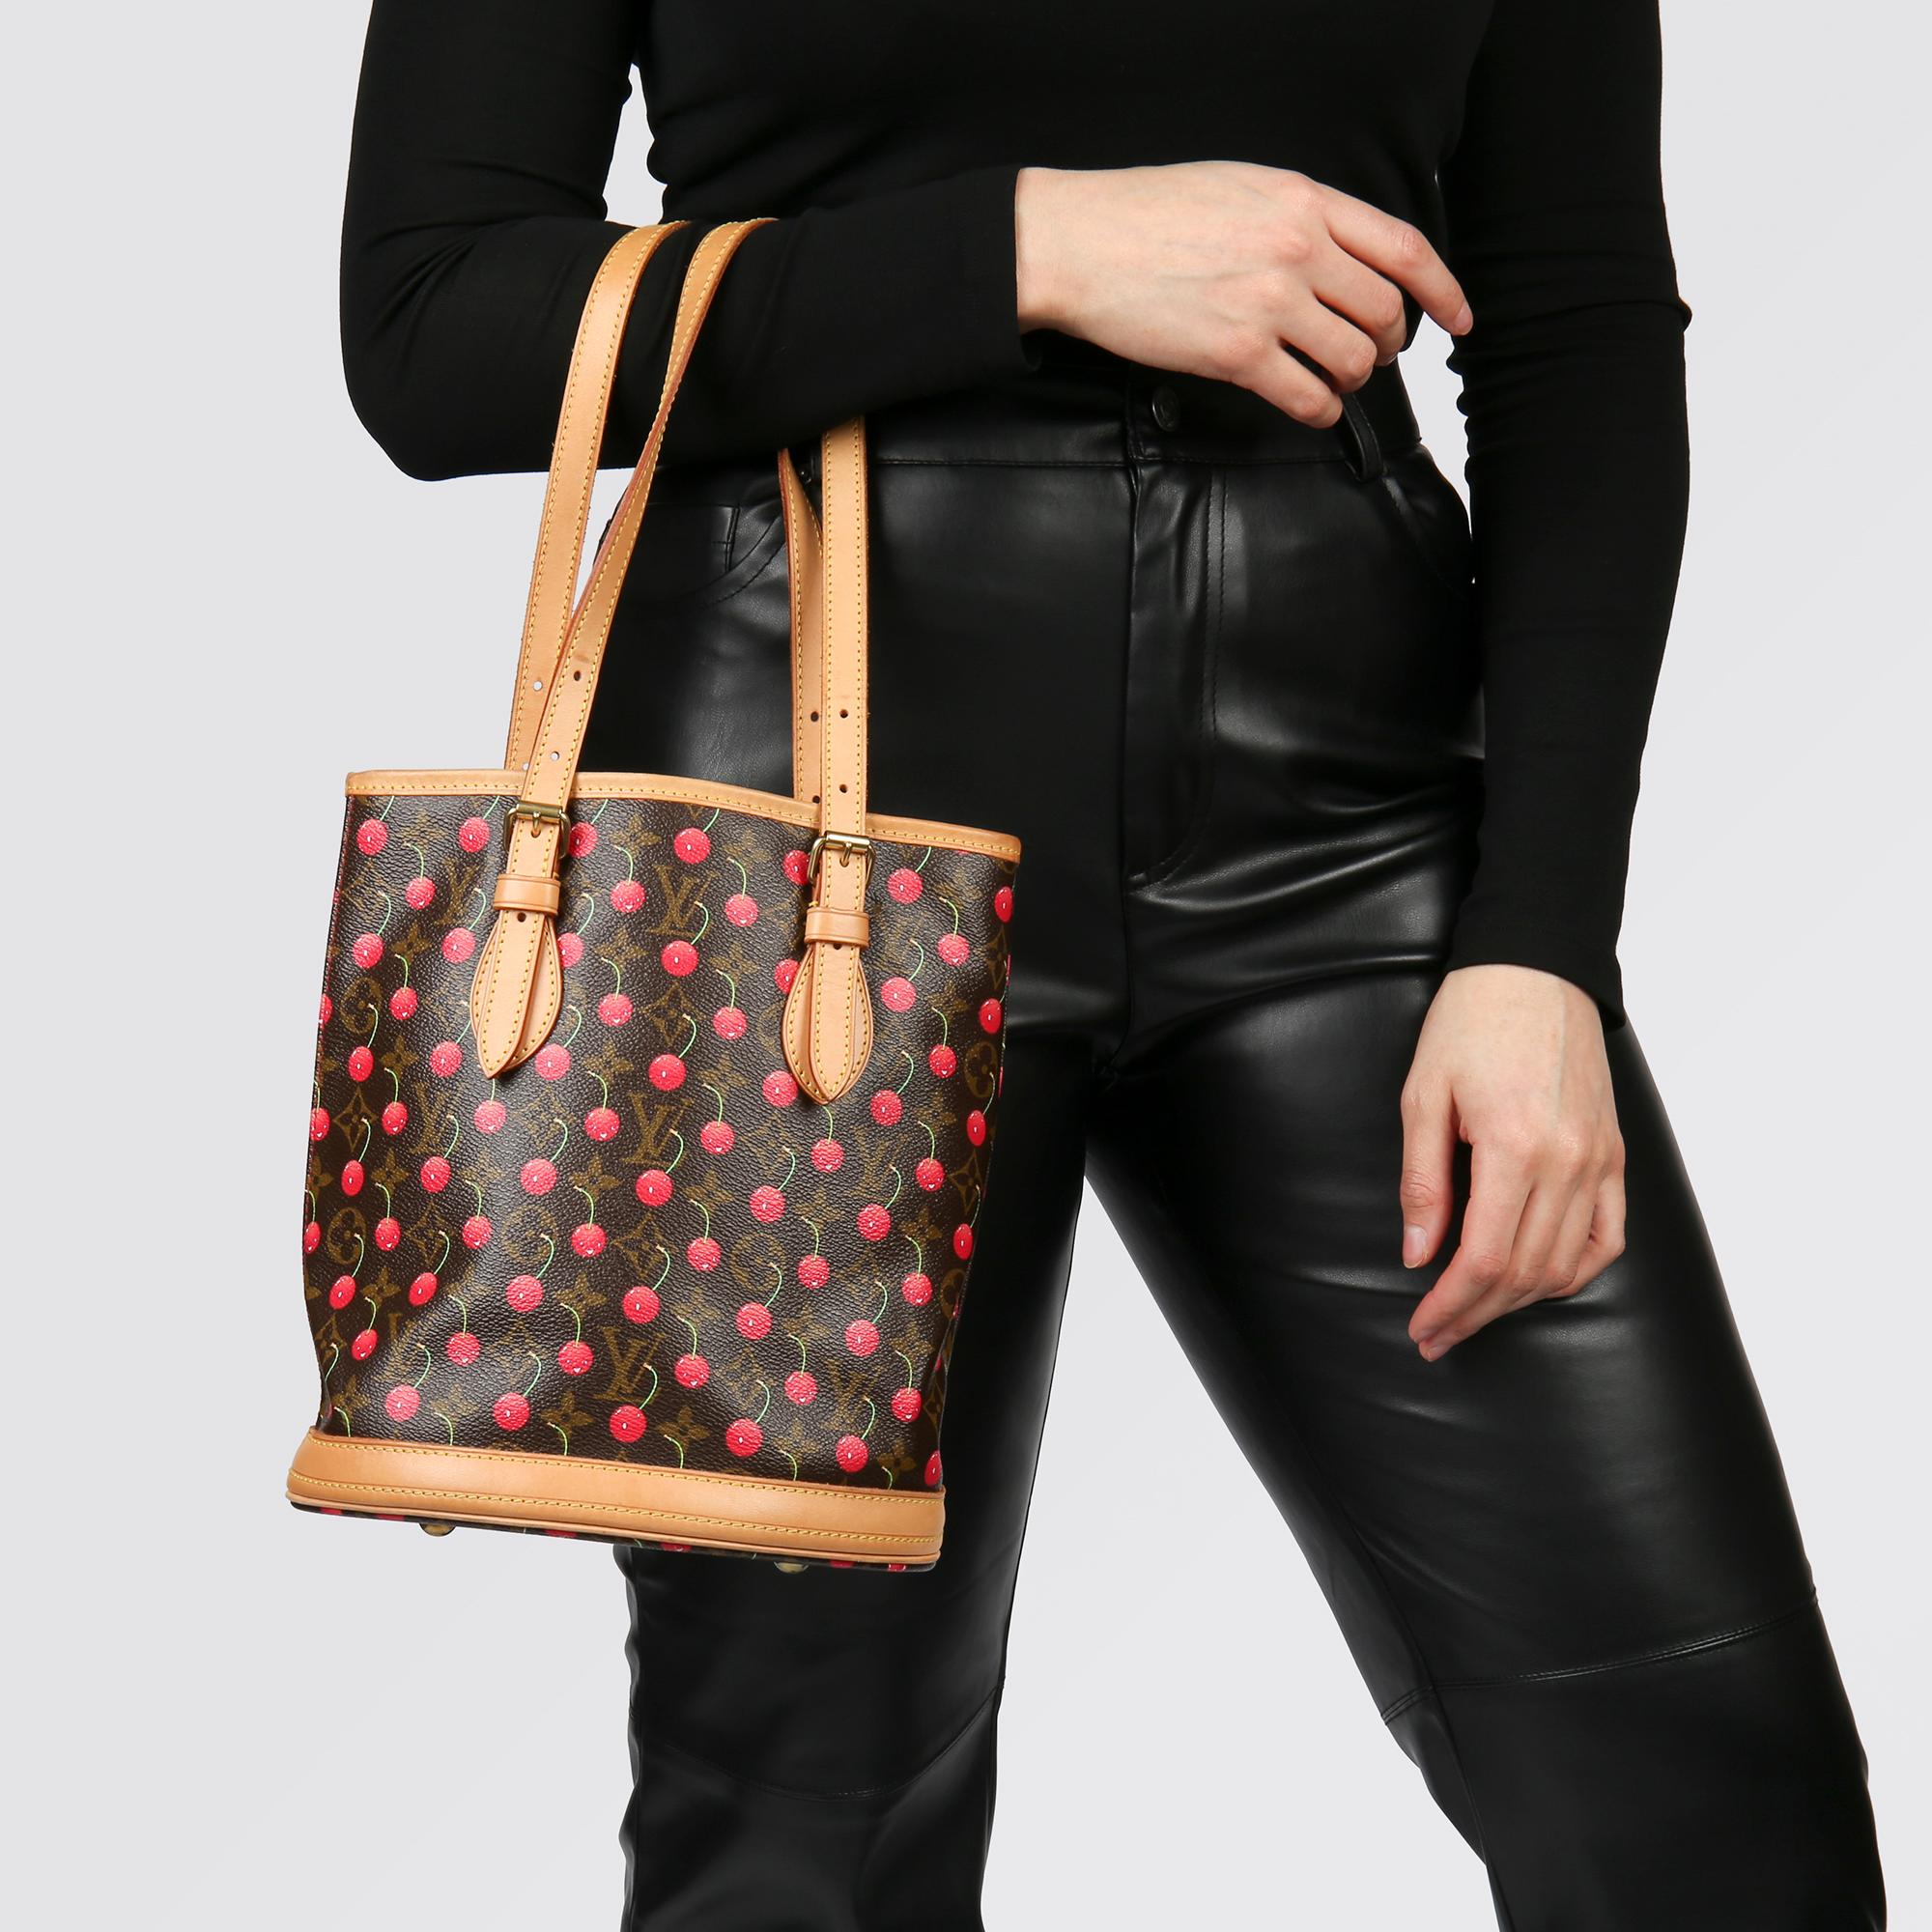 LOUIS VUITTON
Cherries Brown Monogram Coated Canvas & Vachetta Leather Murakami Bucket Bag

Xupes Reference: HB3781
Serial Number: FL0025
Age (Circa): 2005
Accompanied By: Louis Vuitton Dust Bag, Box
Authenticity Details: Date Stamp (Made in